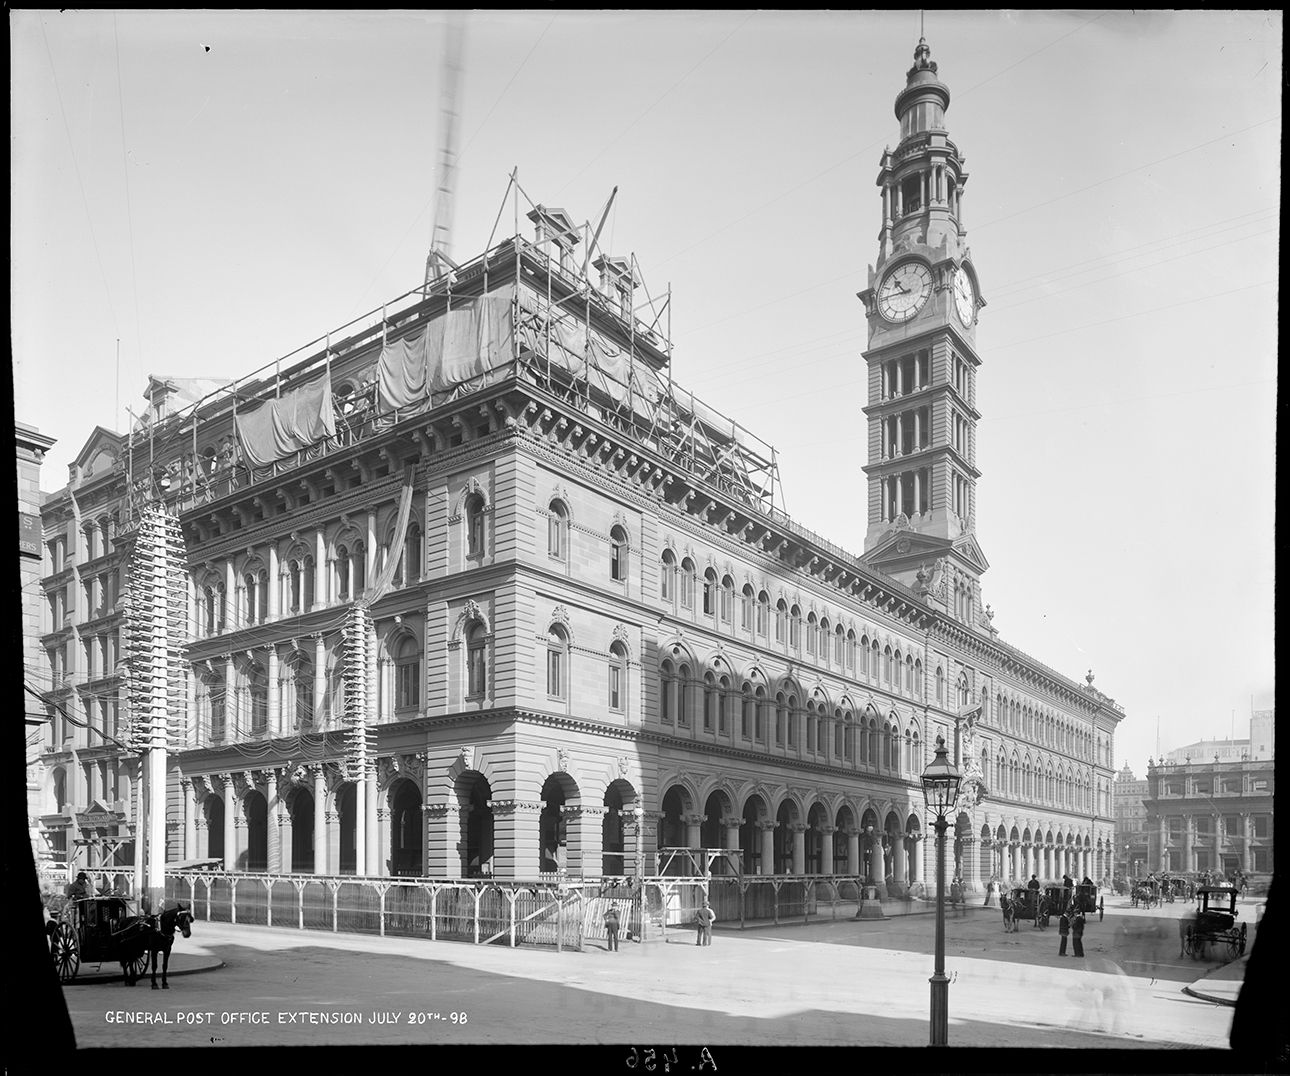 View of the General Post Office in Sydney in 1898